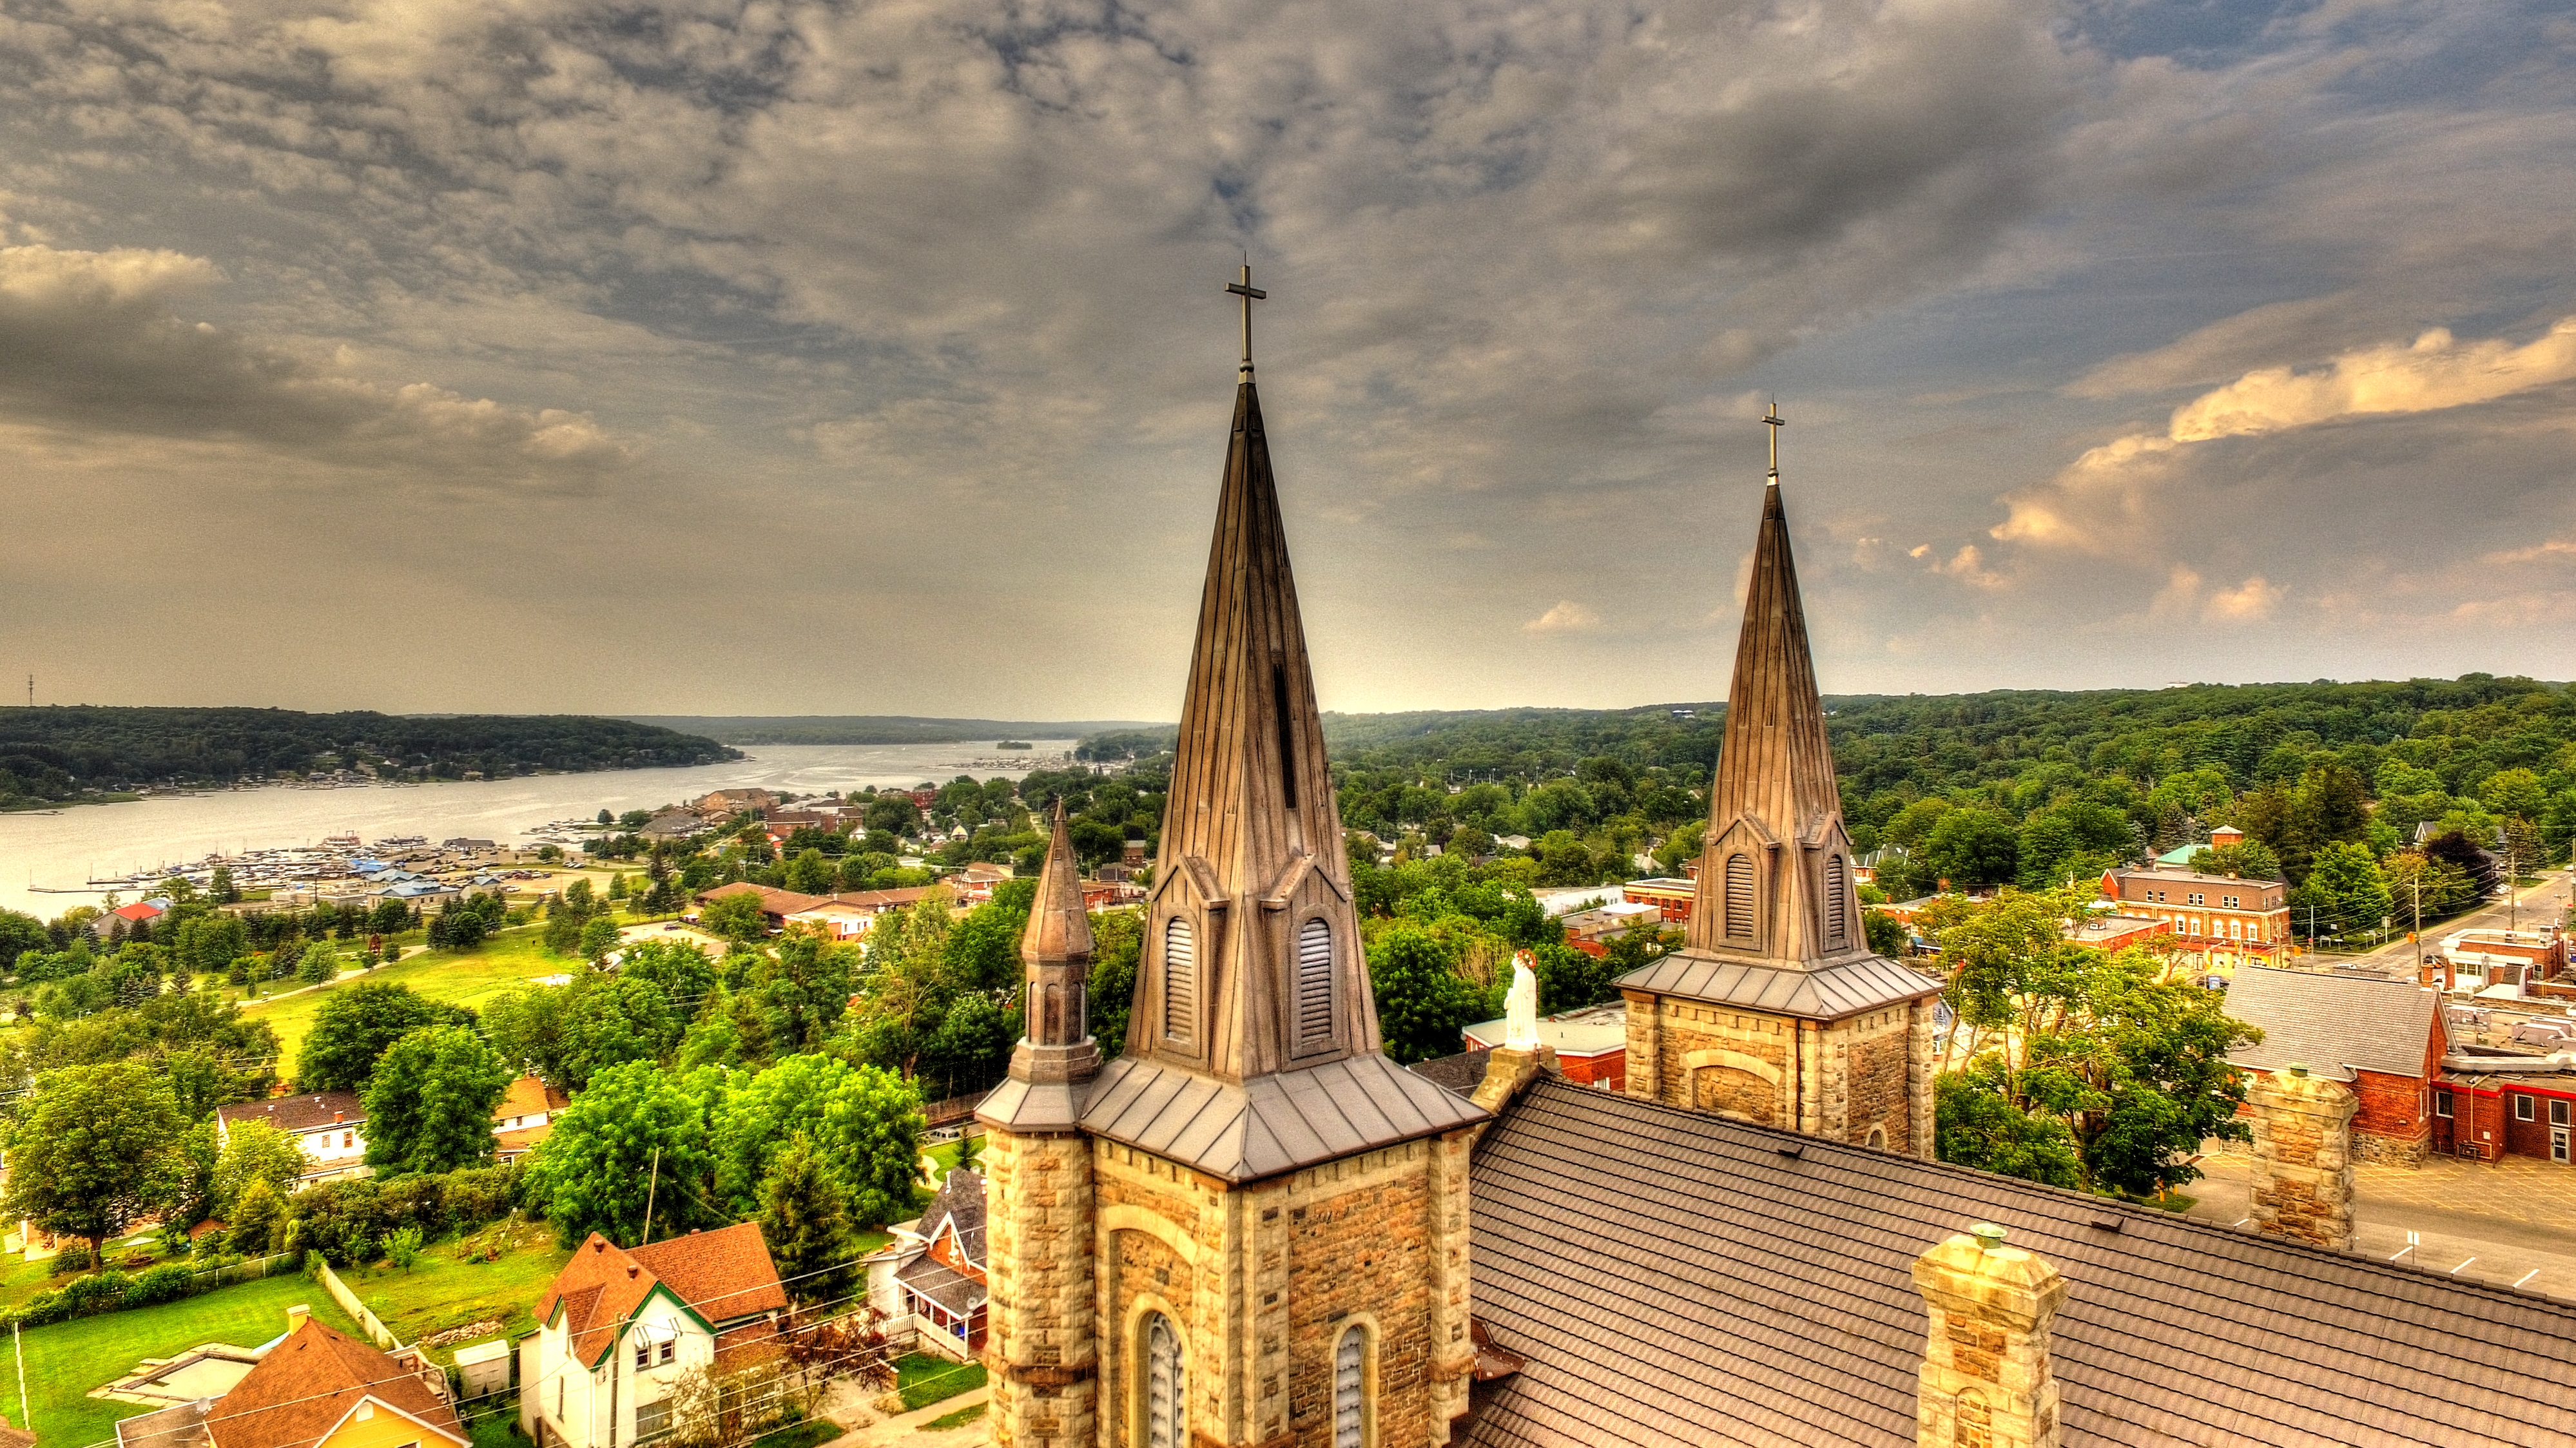 Drone of St. Ann's Church by the steeples with a view over georgian bay